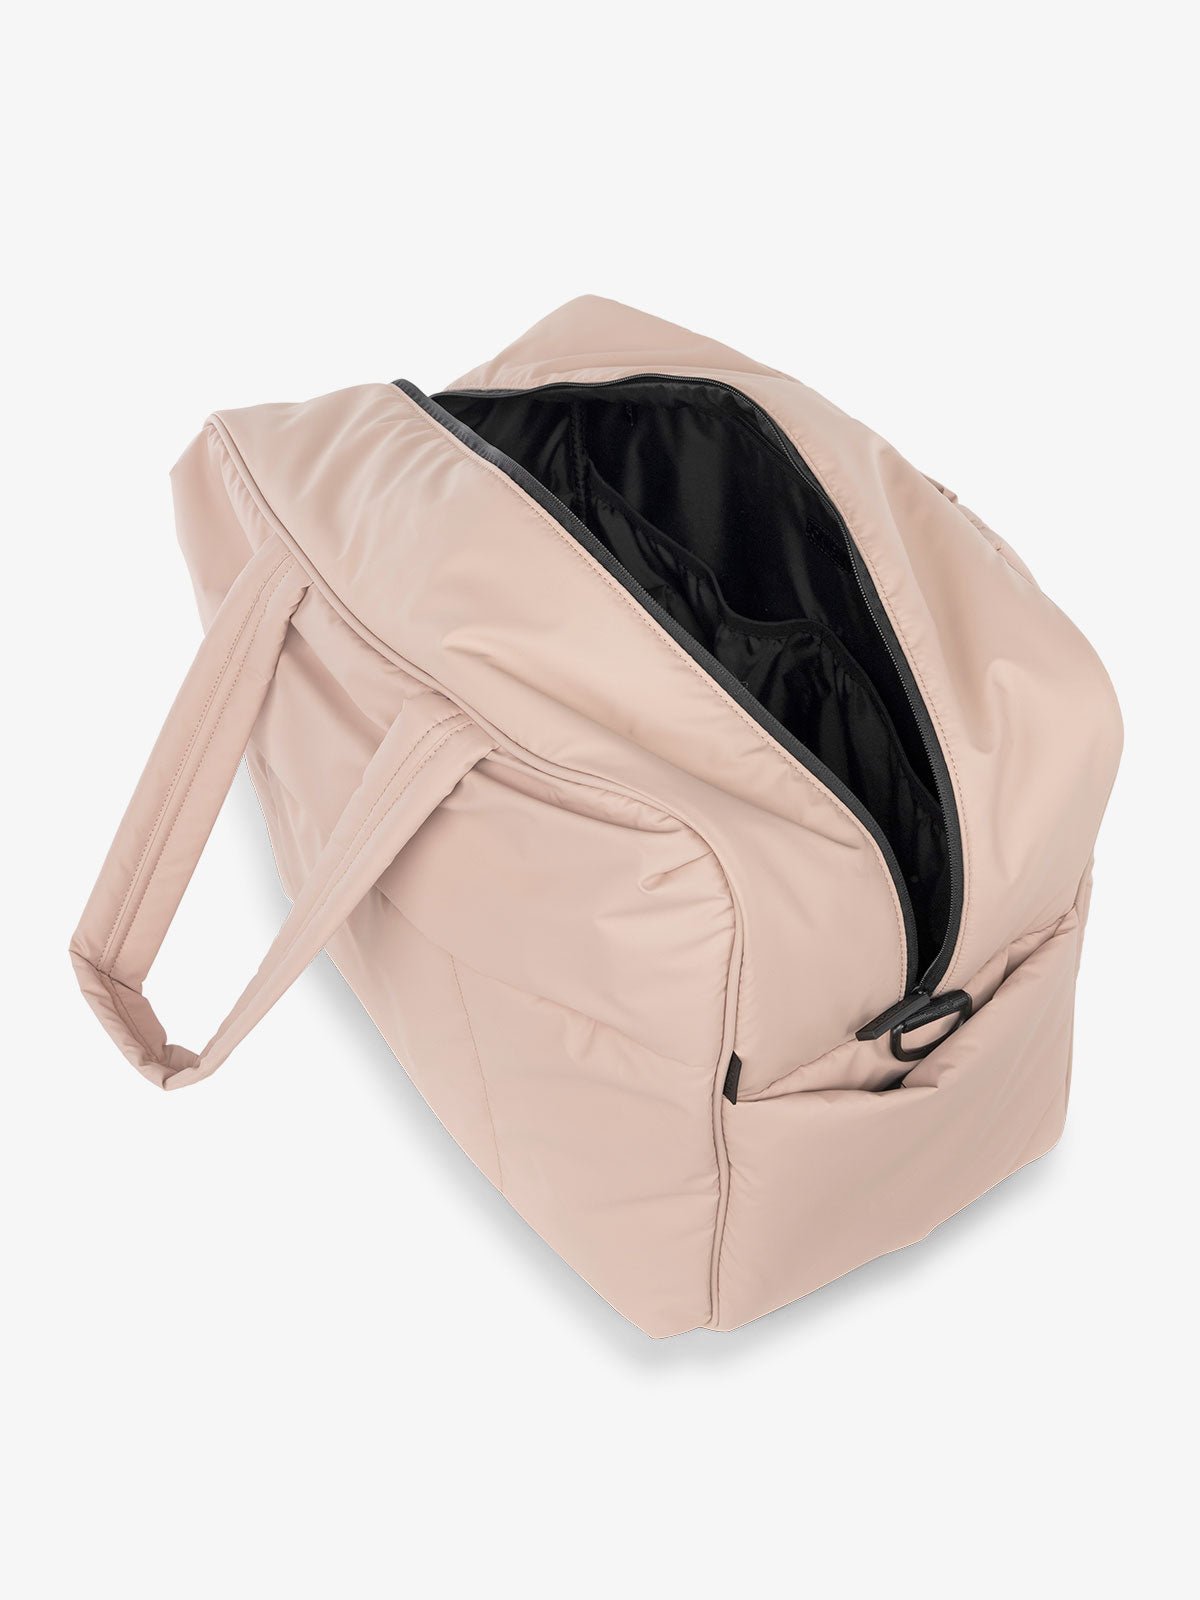 CALPAK water resistant Luka large duffel with multiple pockets and top handles in light pink